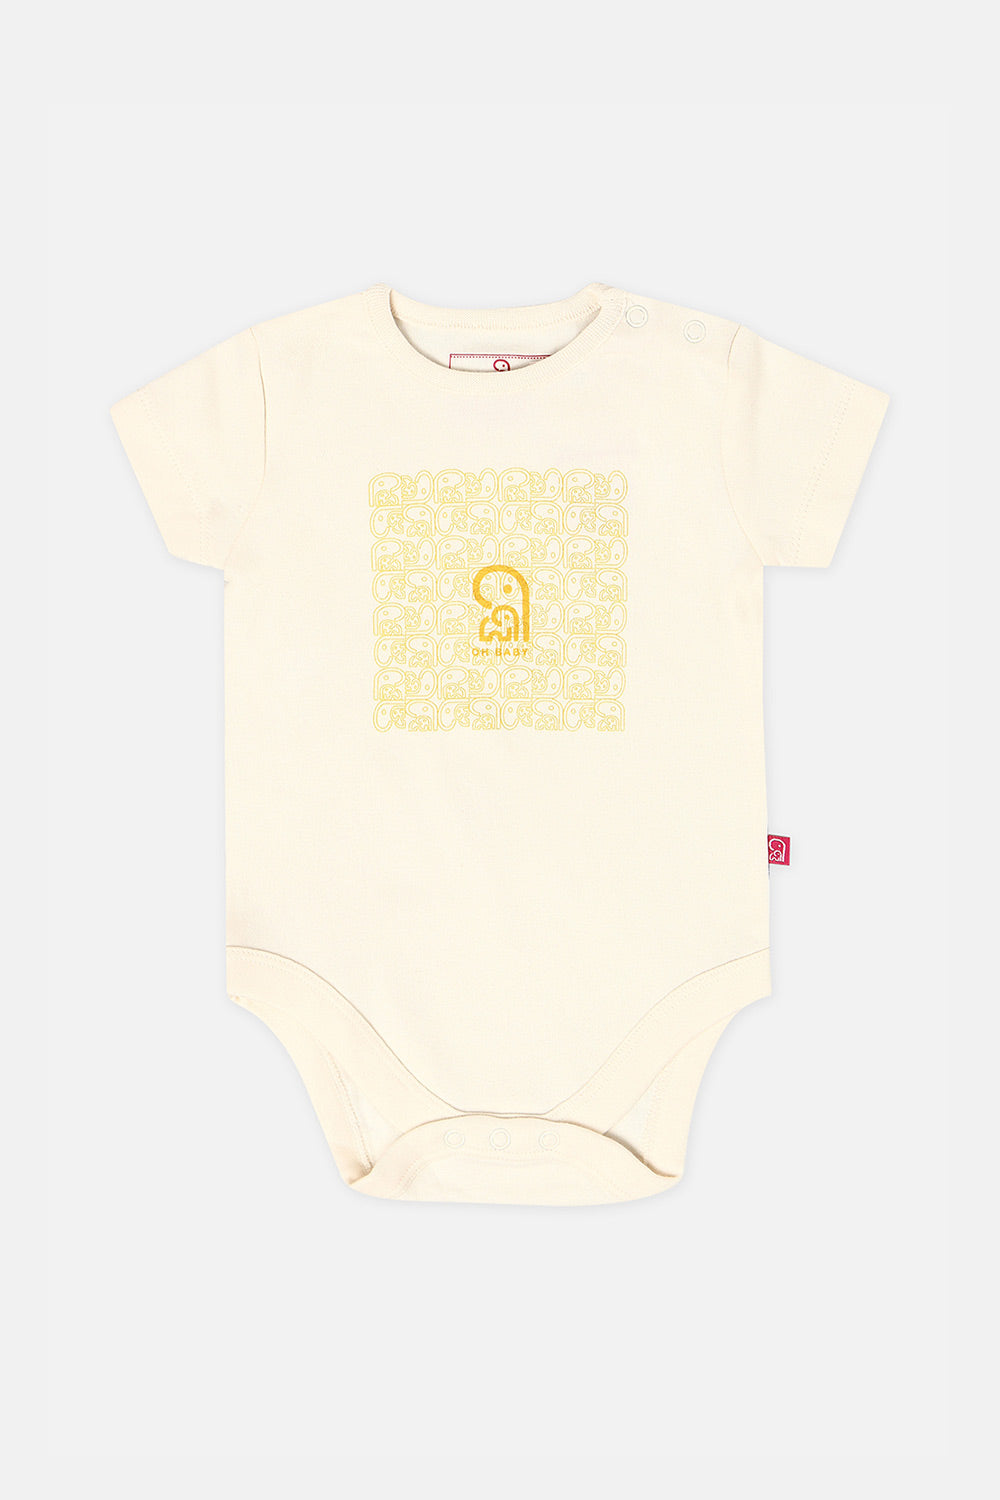 Oh Baby Onesies Shoulder Open White-Os05